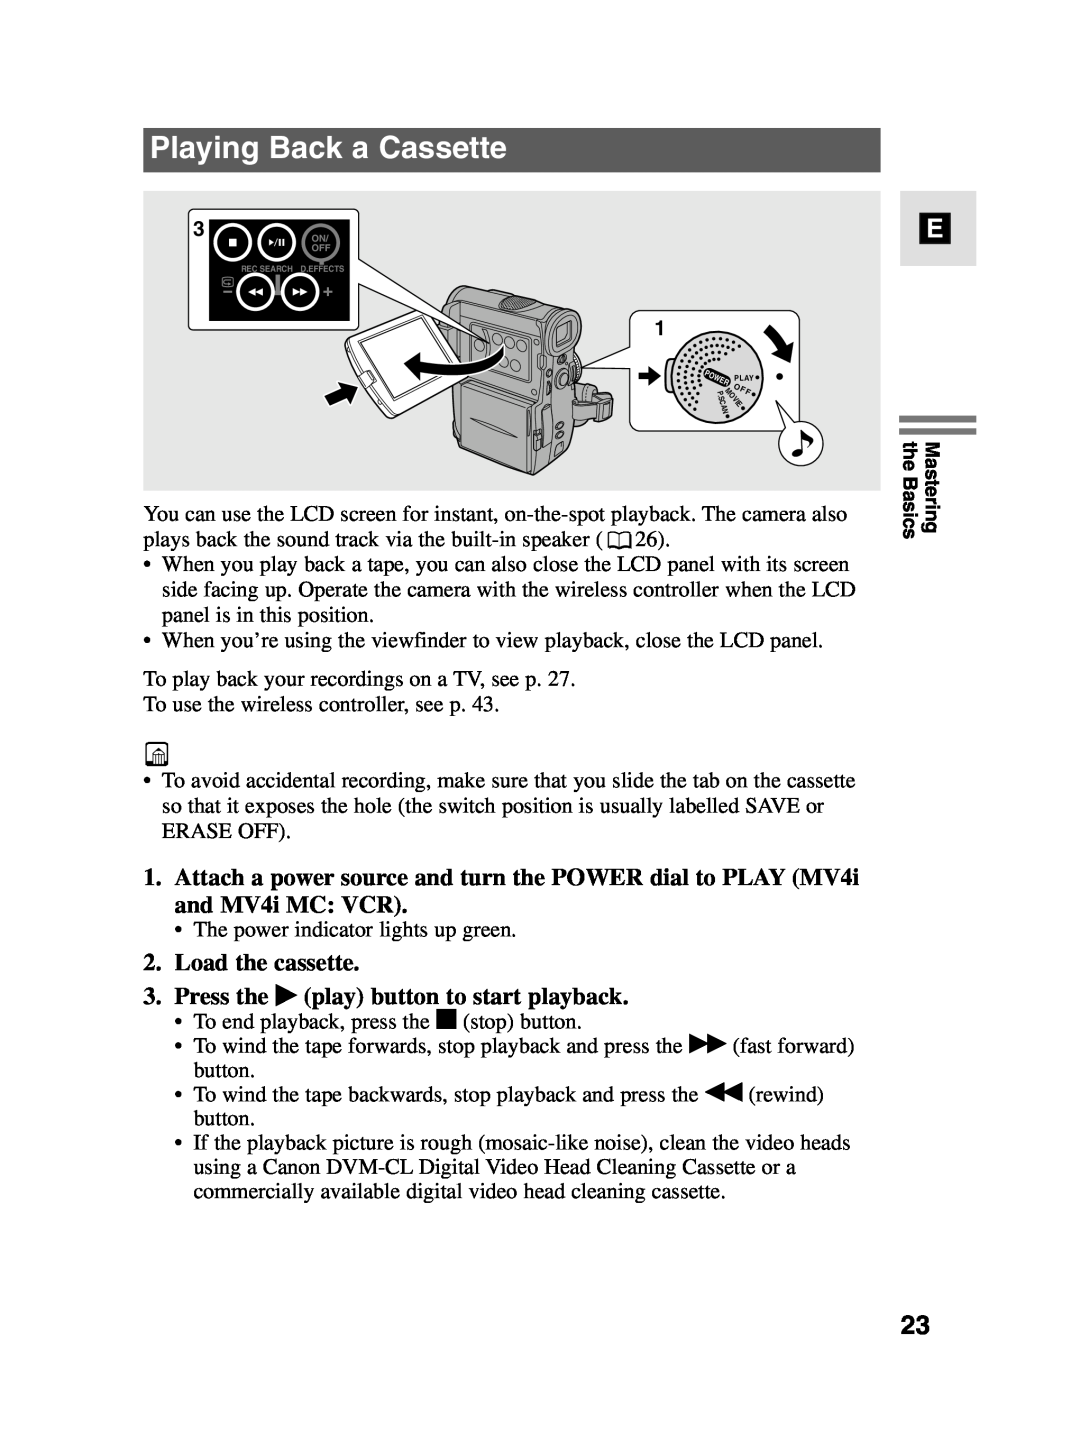 Canon MV4i MC instruction manual Playing Back a Cassette, Load the cassette 3. Press the e play button to start playback 